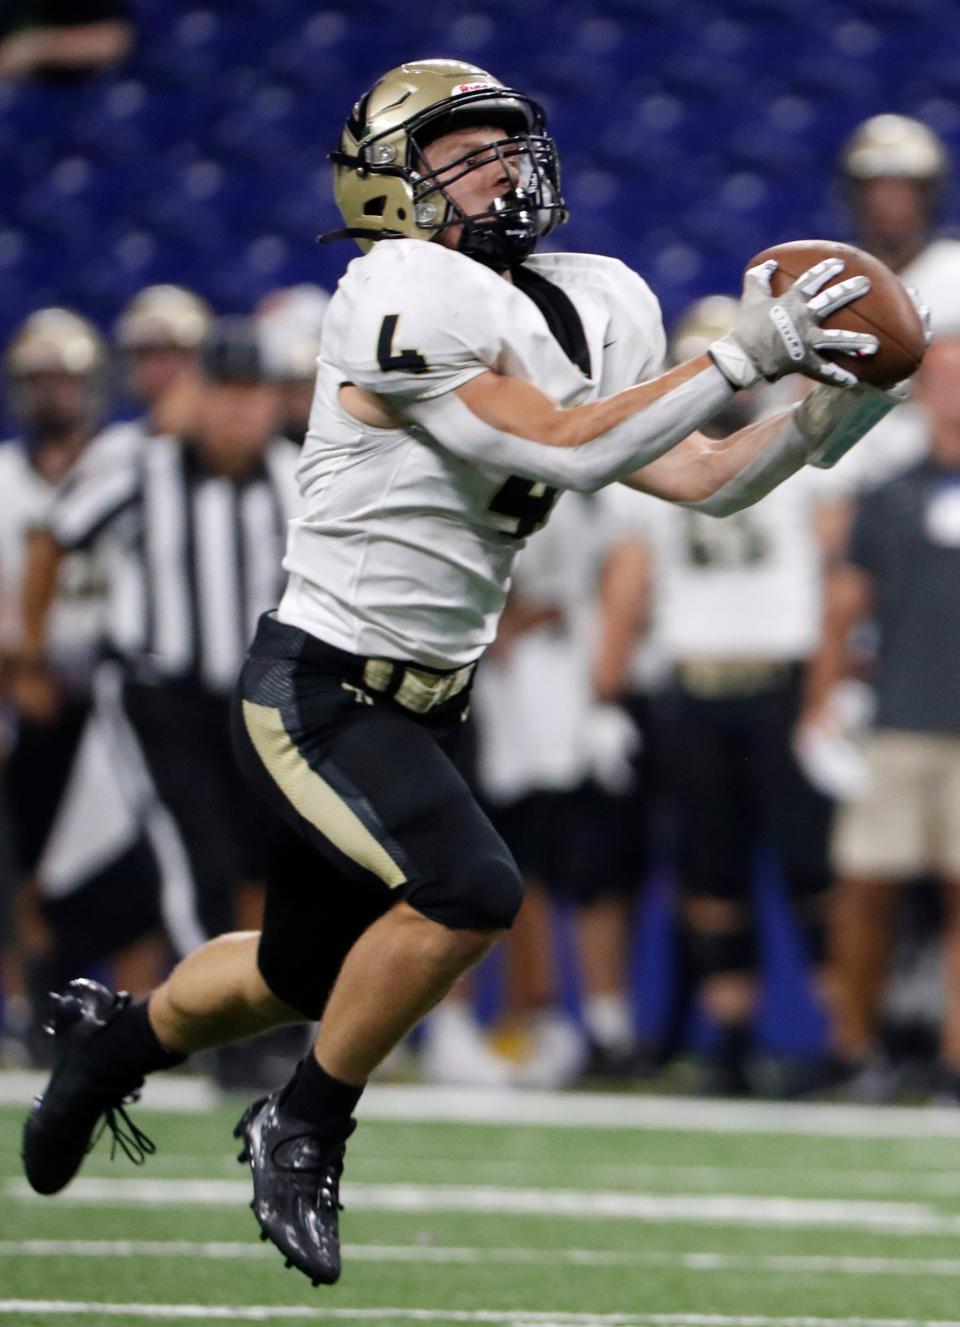 Noblesville Millers Logan Shoffner (4) catches a pass for a touchdown during the IHSAA football game against the Mt. Vernon Marauders, Friday, Aug. 18, 2023, at Lucas Oil Stadium in Indianapolis. Noblesville won 48-30.